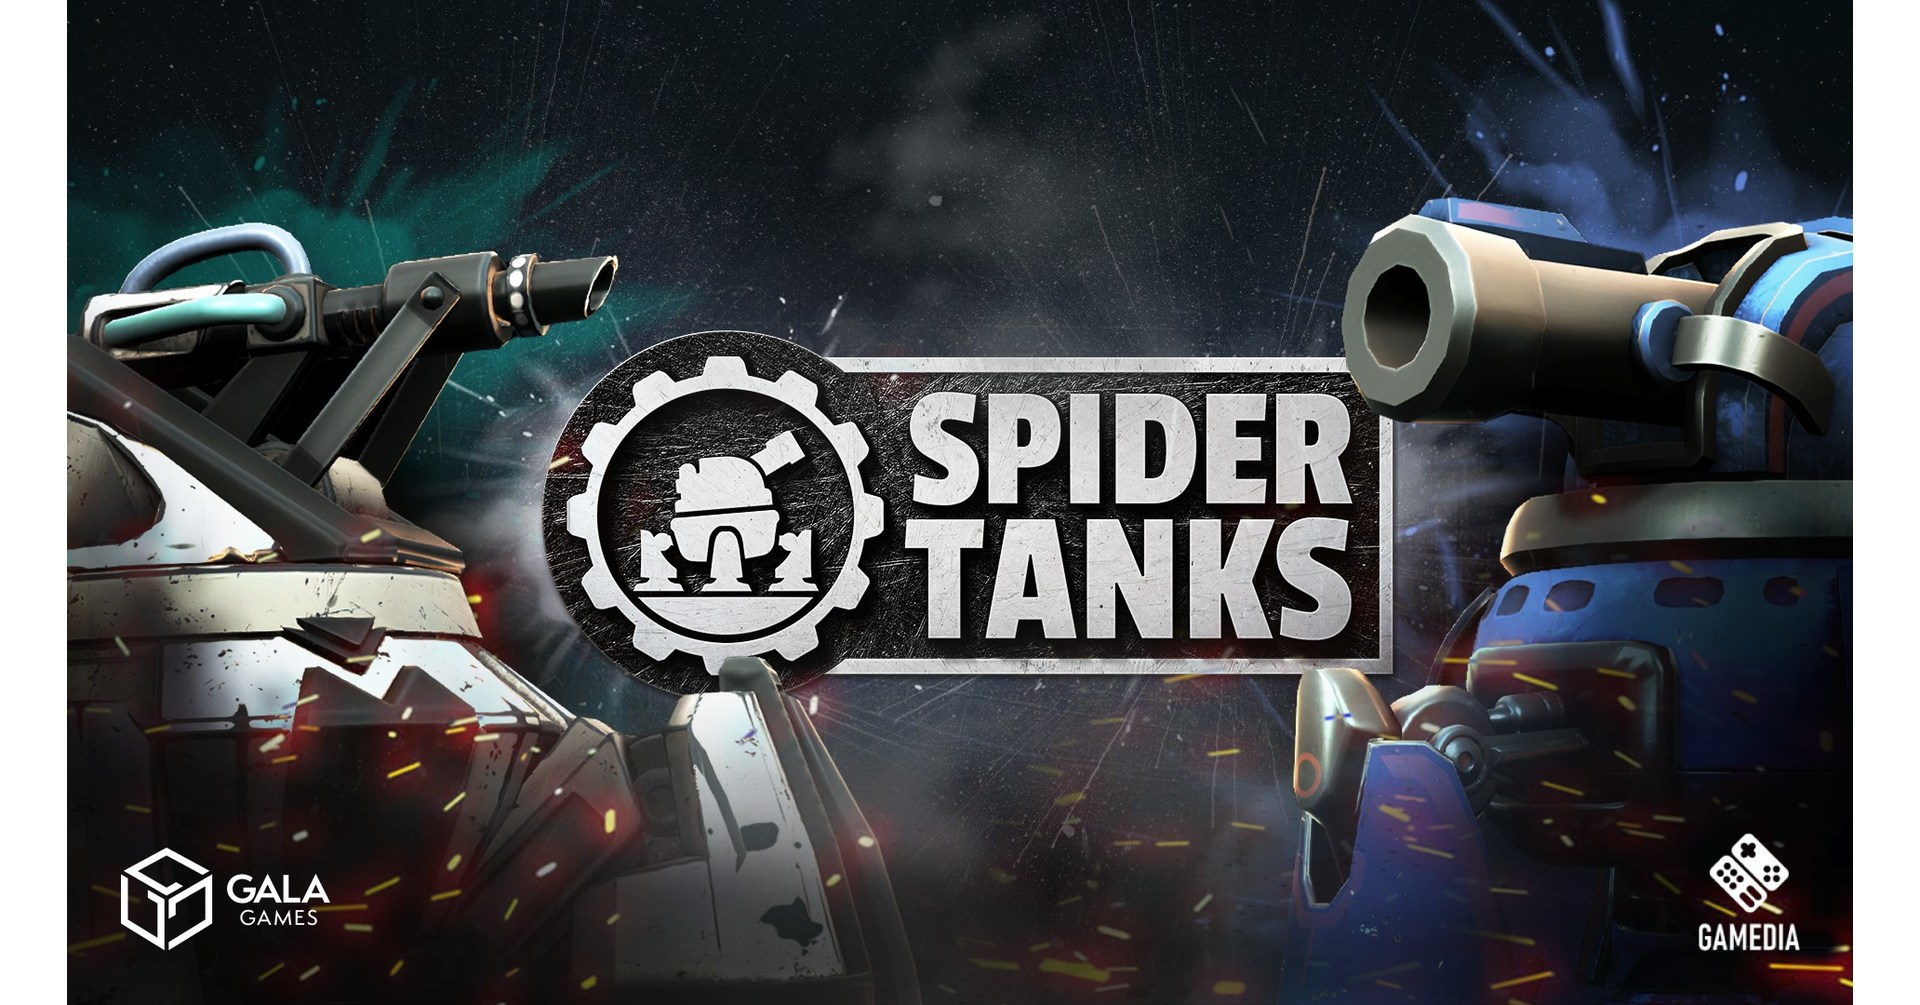 Creepy Crawlers meets Battle Brawler with the Official Launch of Gala Games’ Spider Tanks